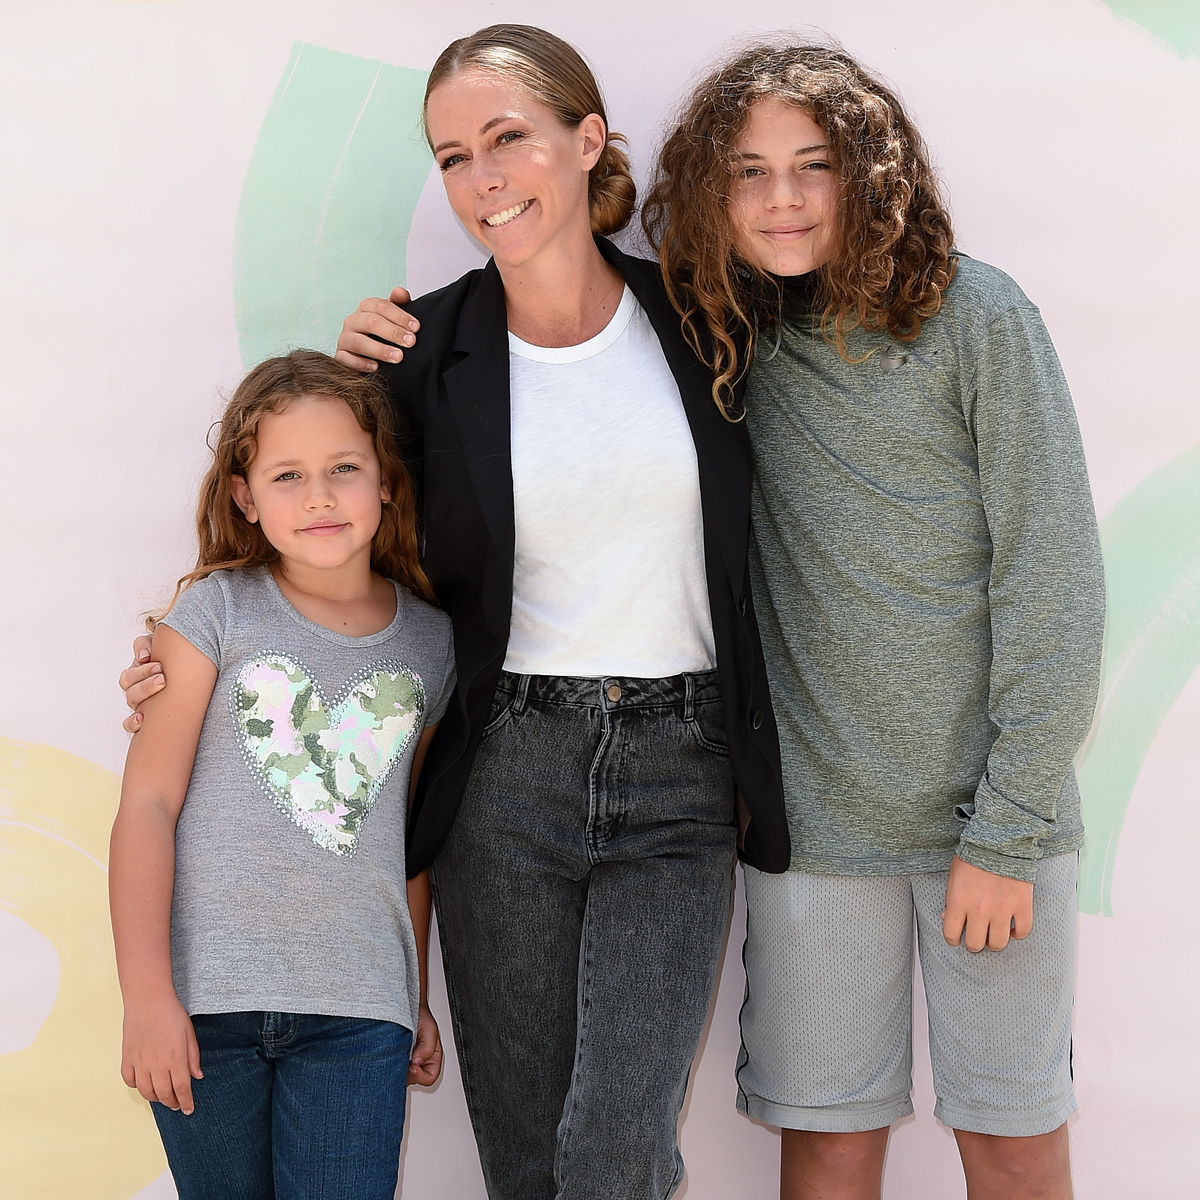 Kendra Wilkinson’s 14-Year-Old Son Hank Looks All Grown Up in Rare Photo